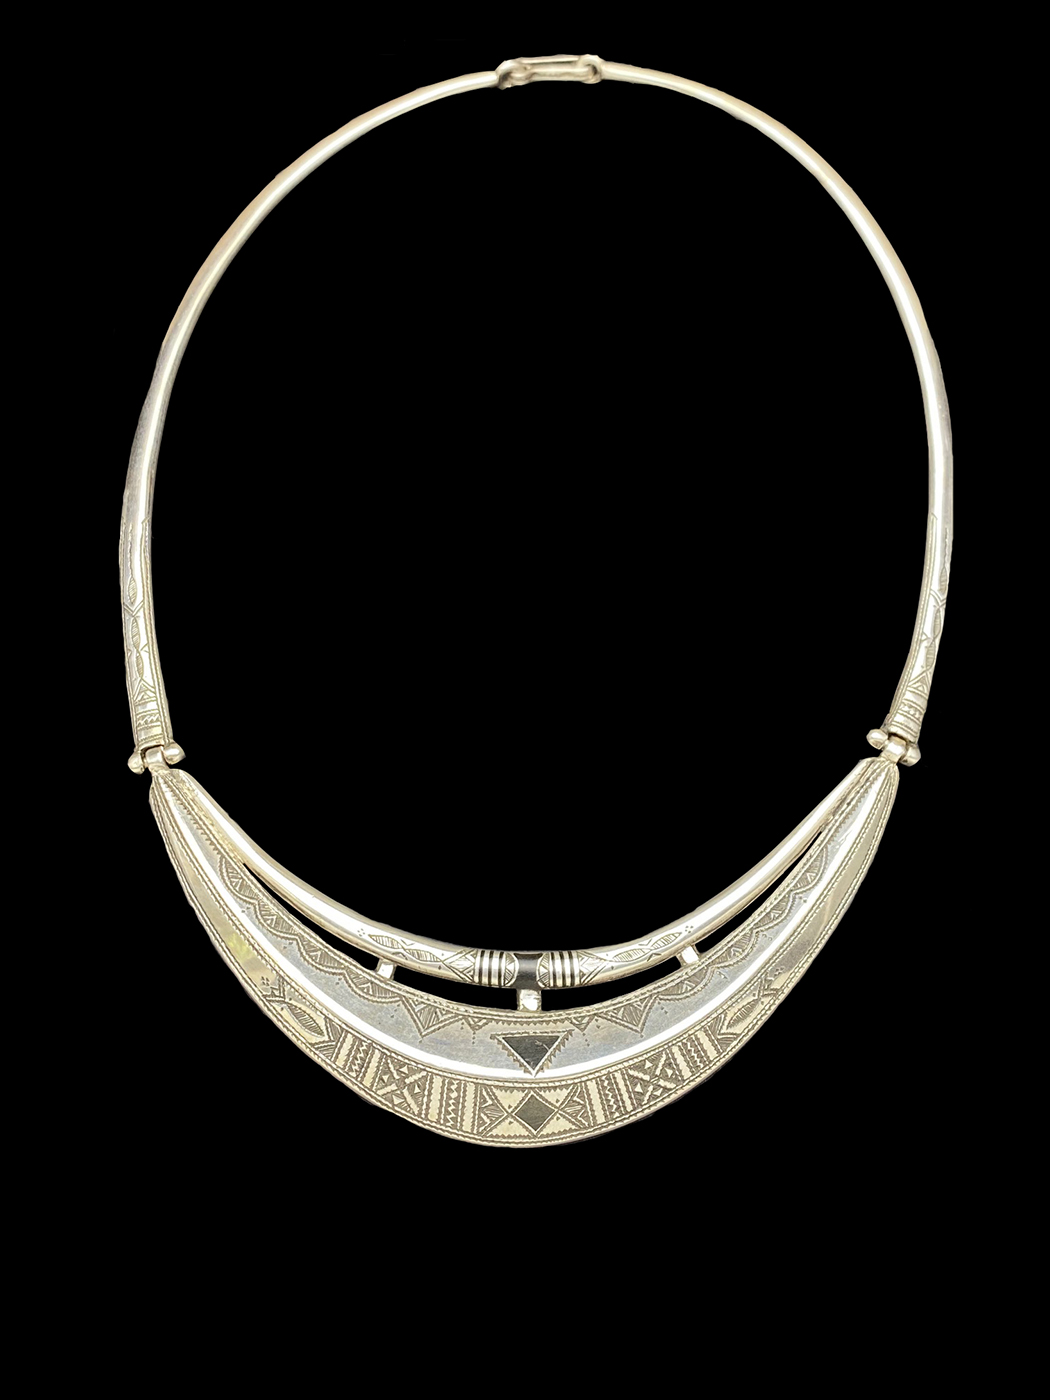 Sterling Silver and Ebony Wood Necklace - Tuareg People, South Sahara